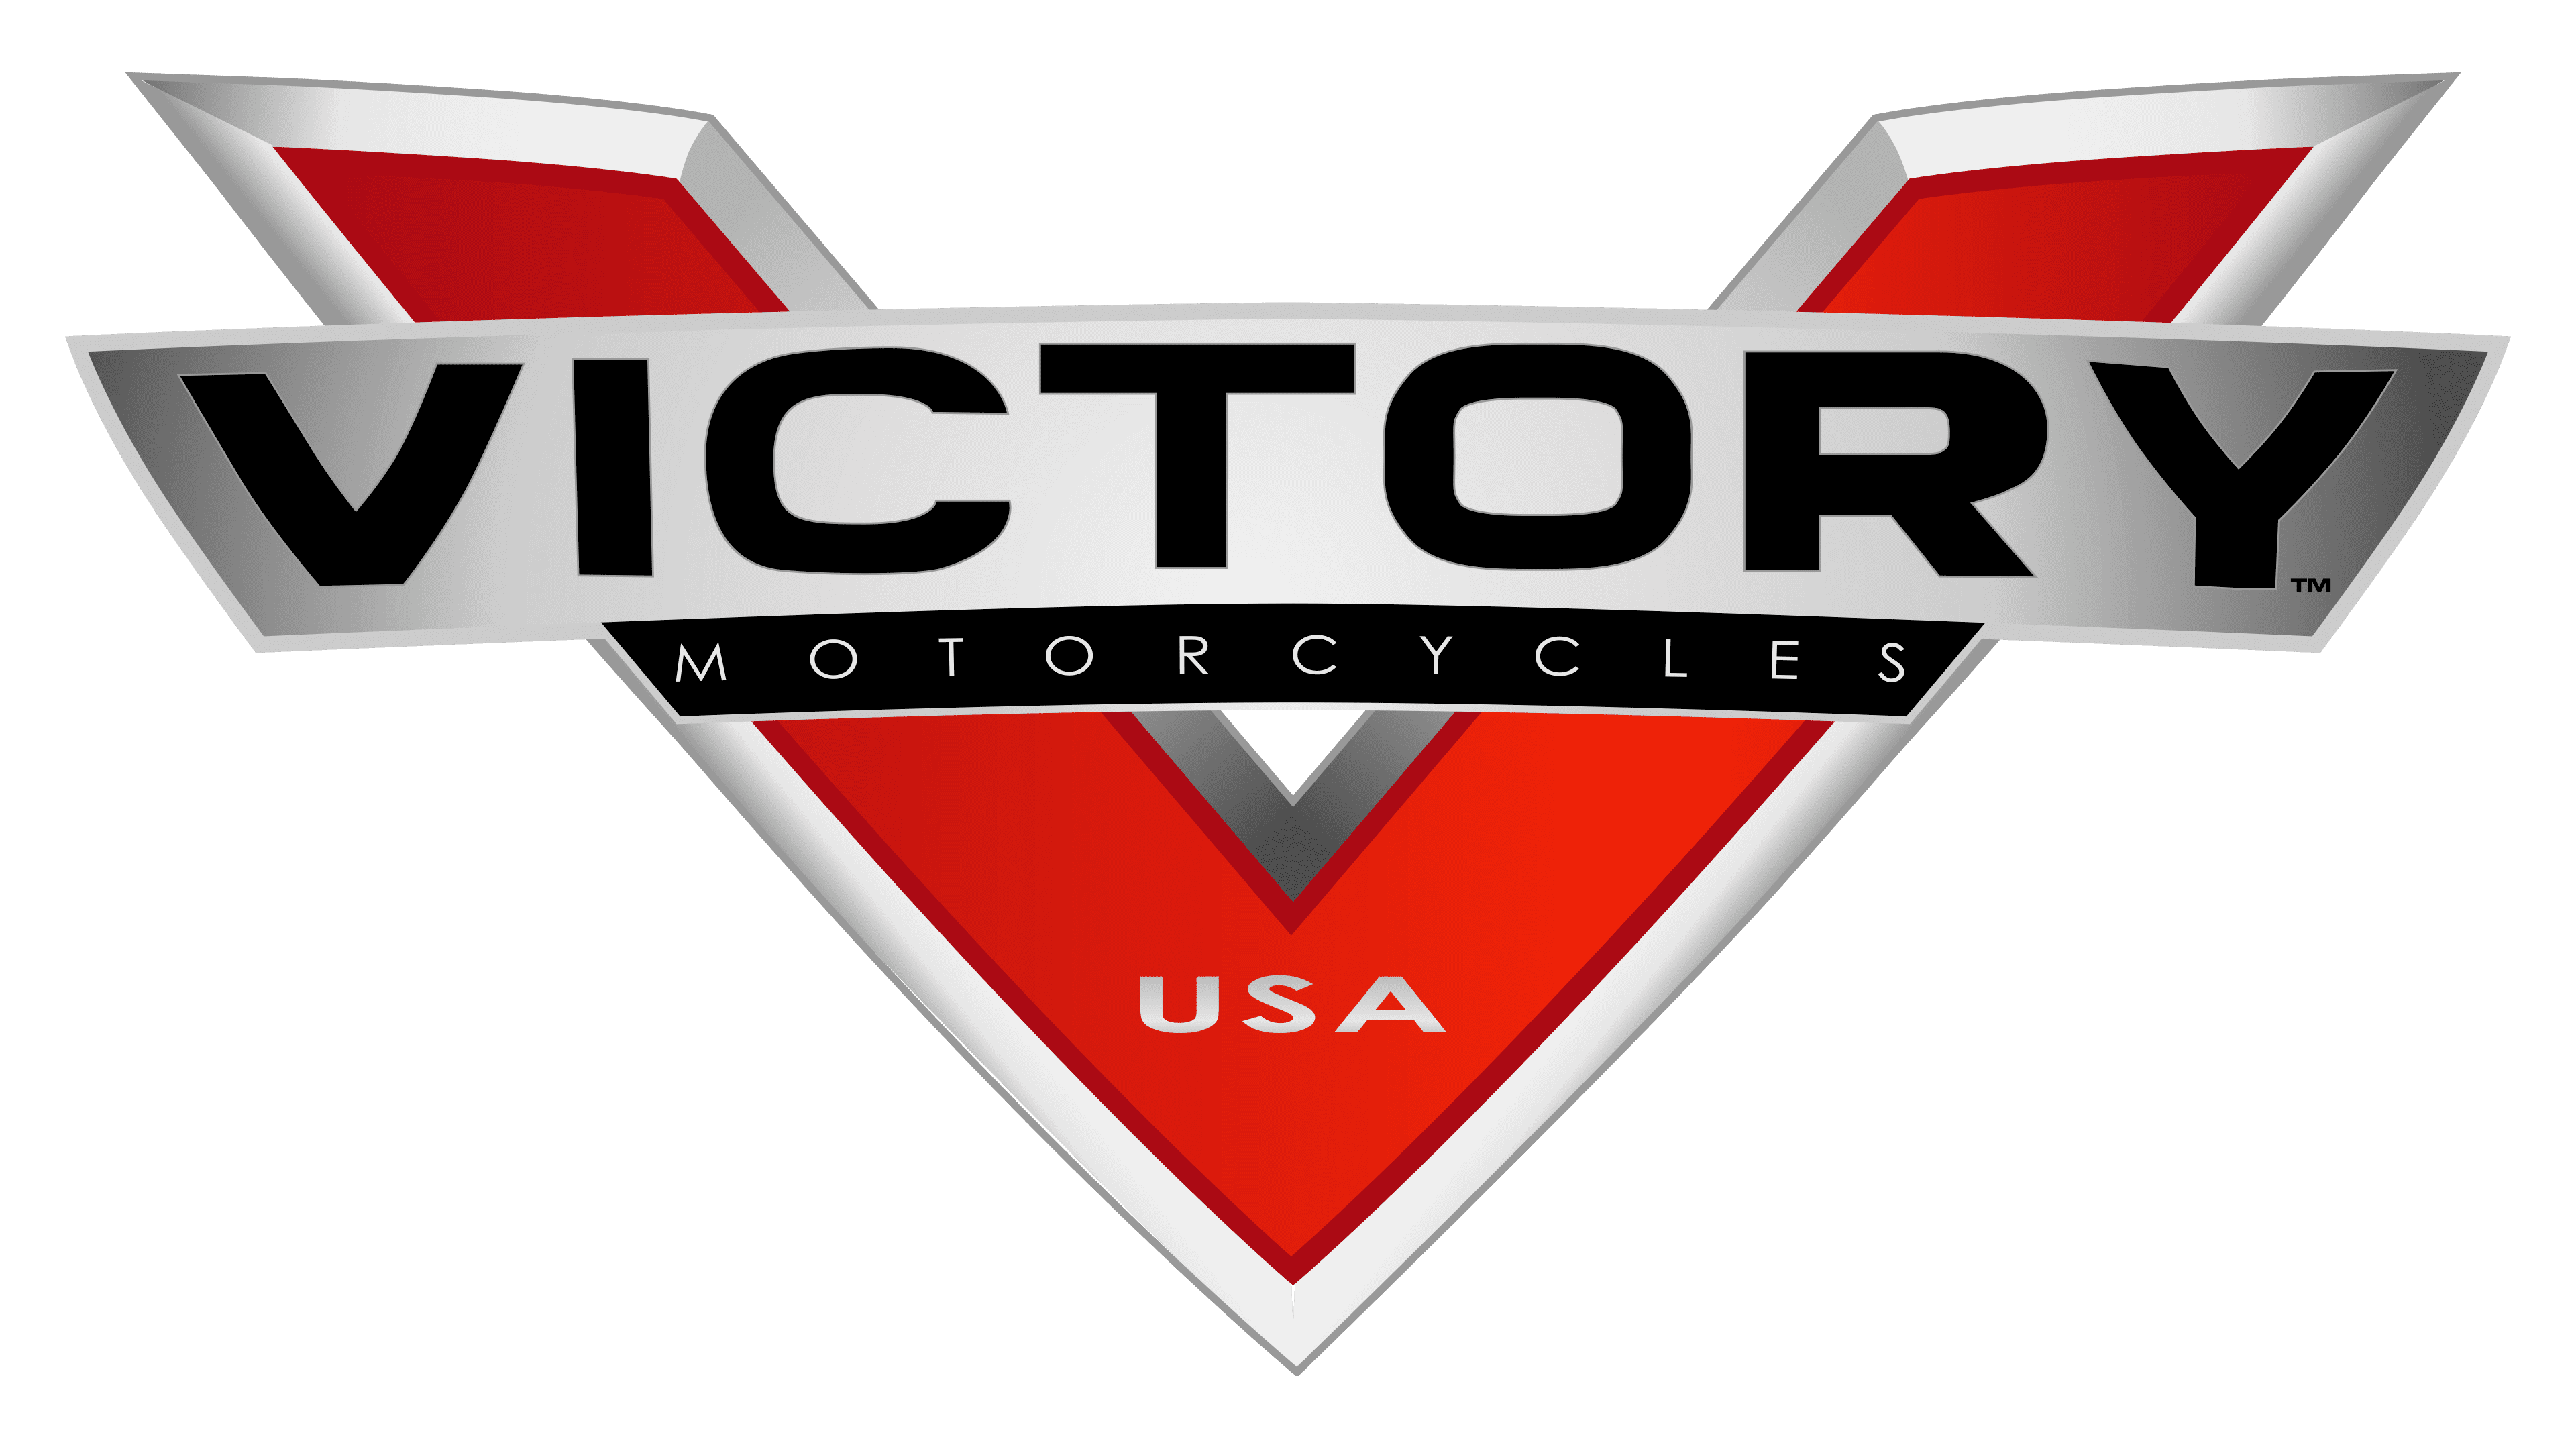 Famous Motorcycle Brands: Motorcycle Logos, Names And Meanings